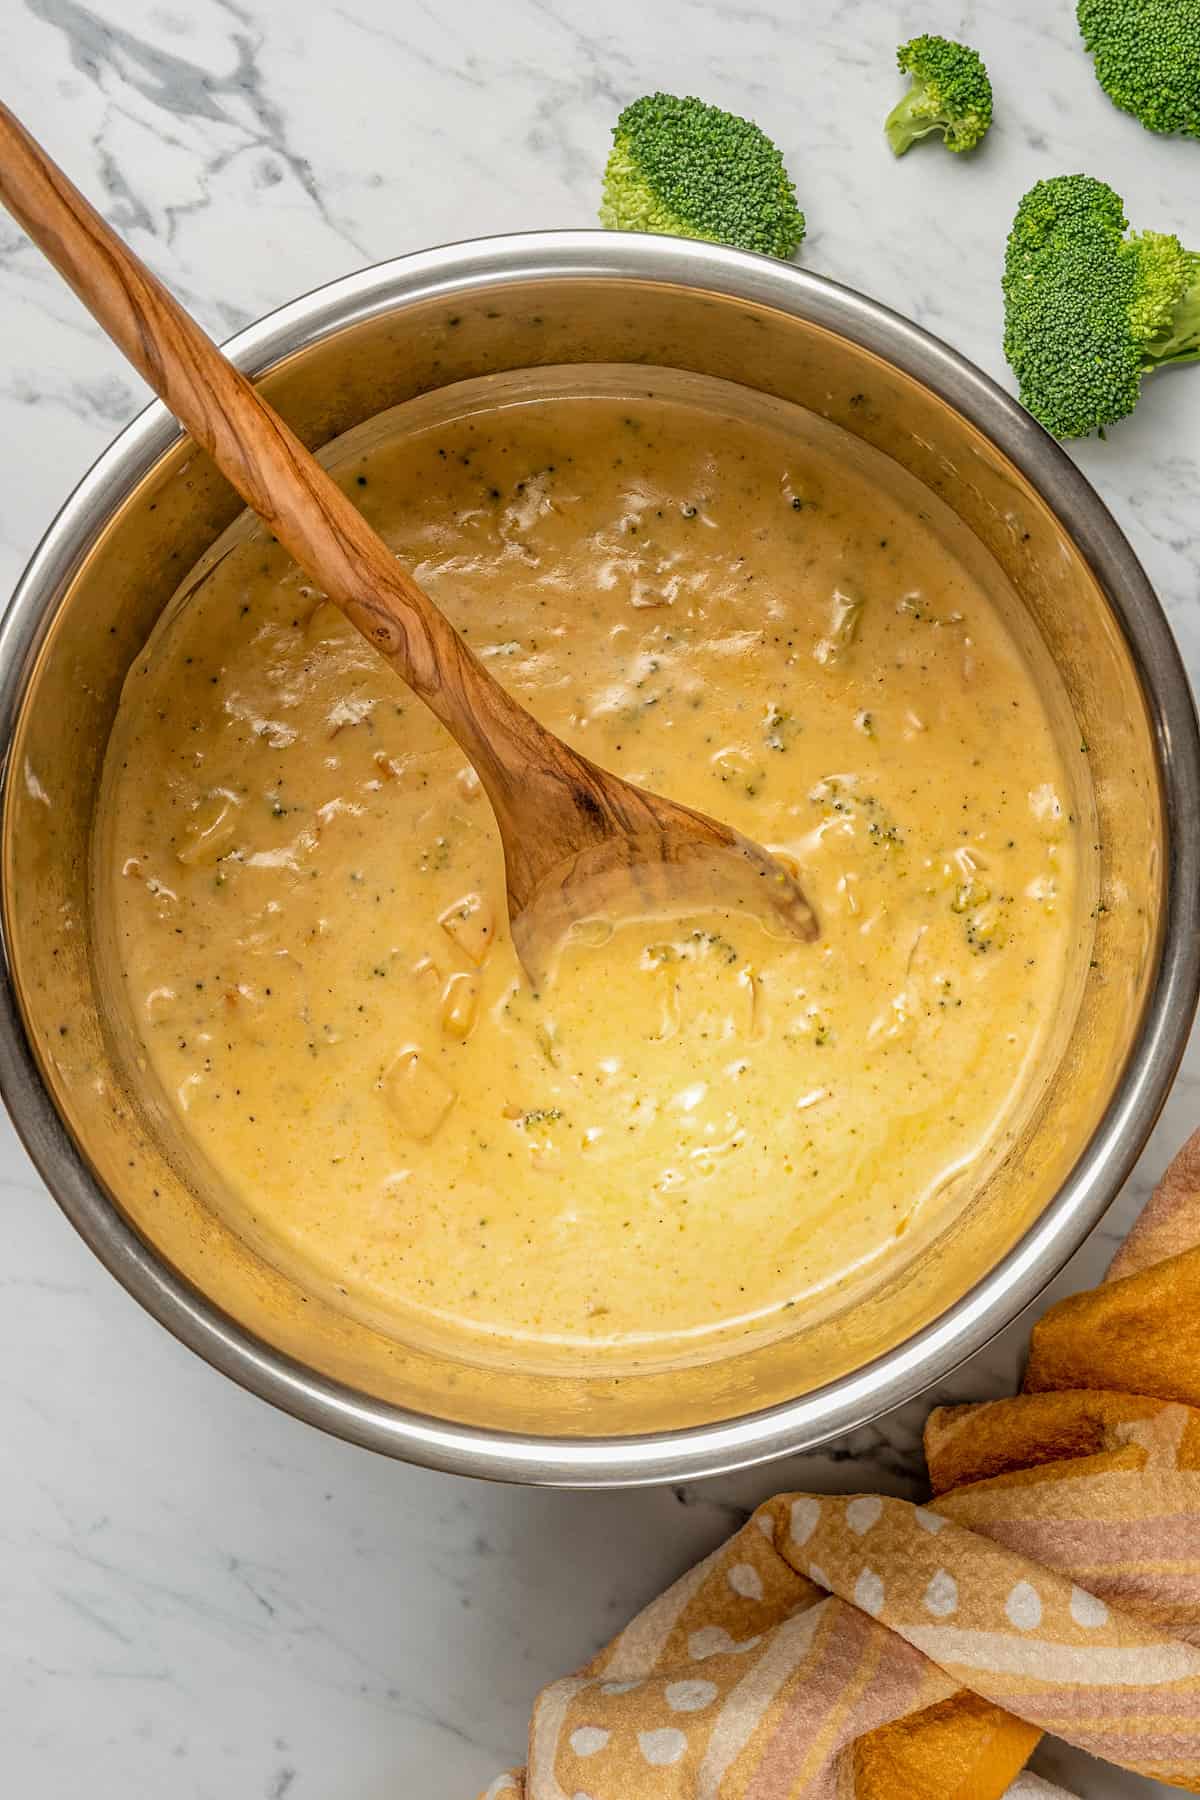 Finished broccoli cheese soup inside the Instant Pot.